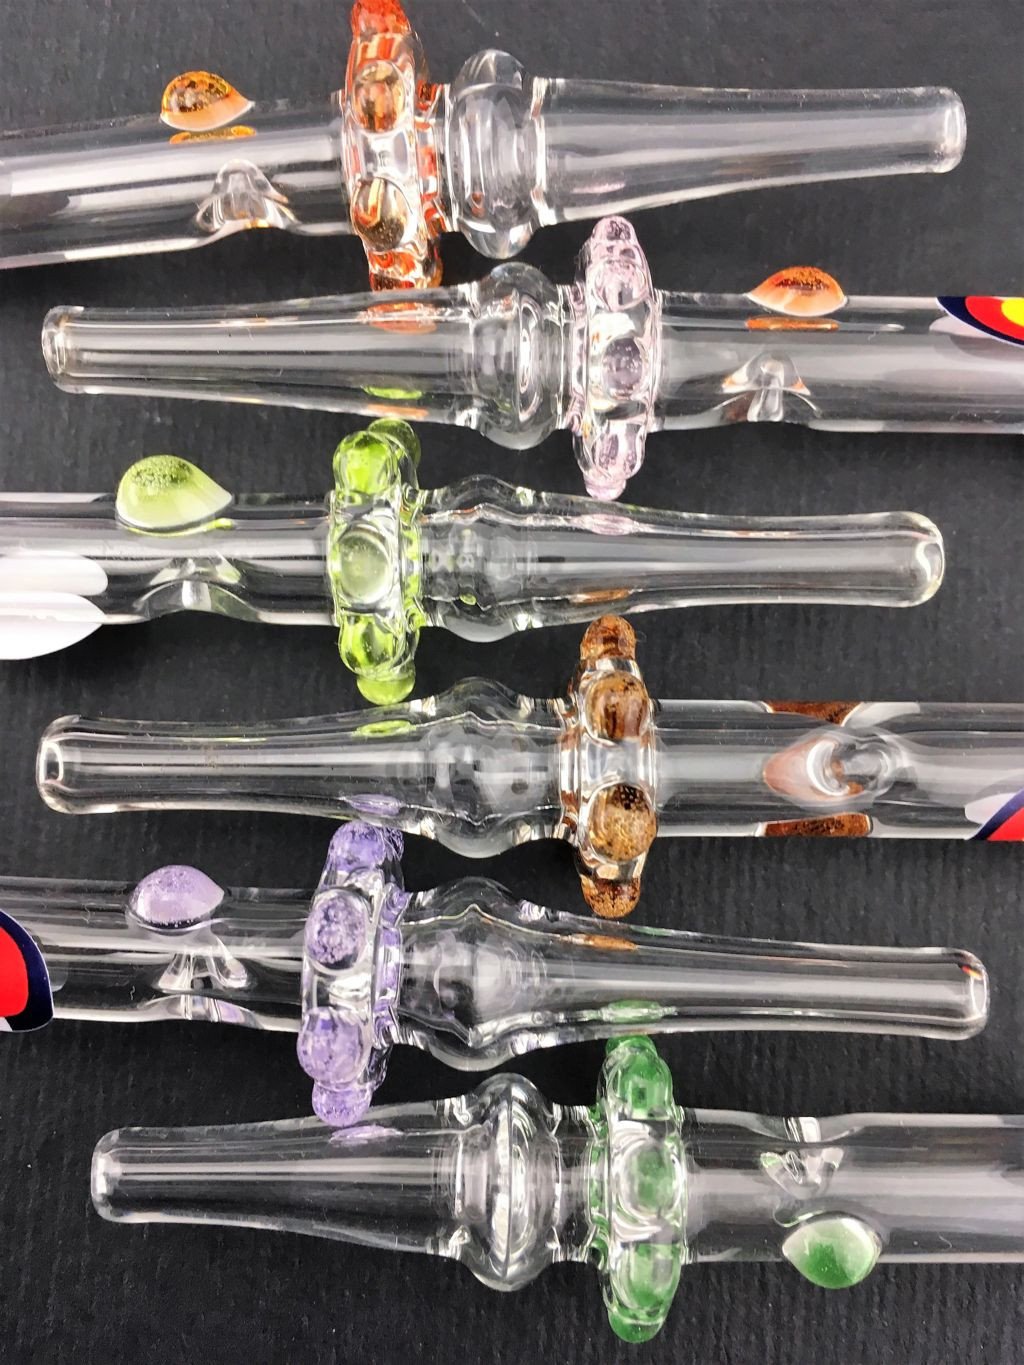 Mini Nectar Collector Dab Straw – Myxed Up Creations, Glass Pipes, Vaporizers, E-Cigs, Detox